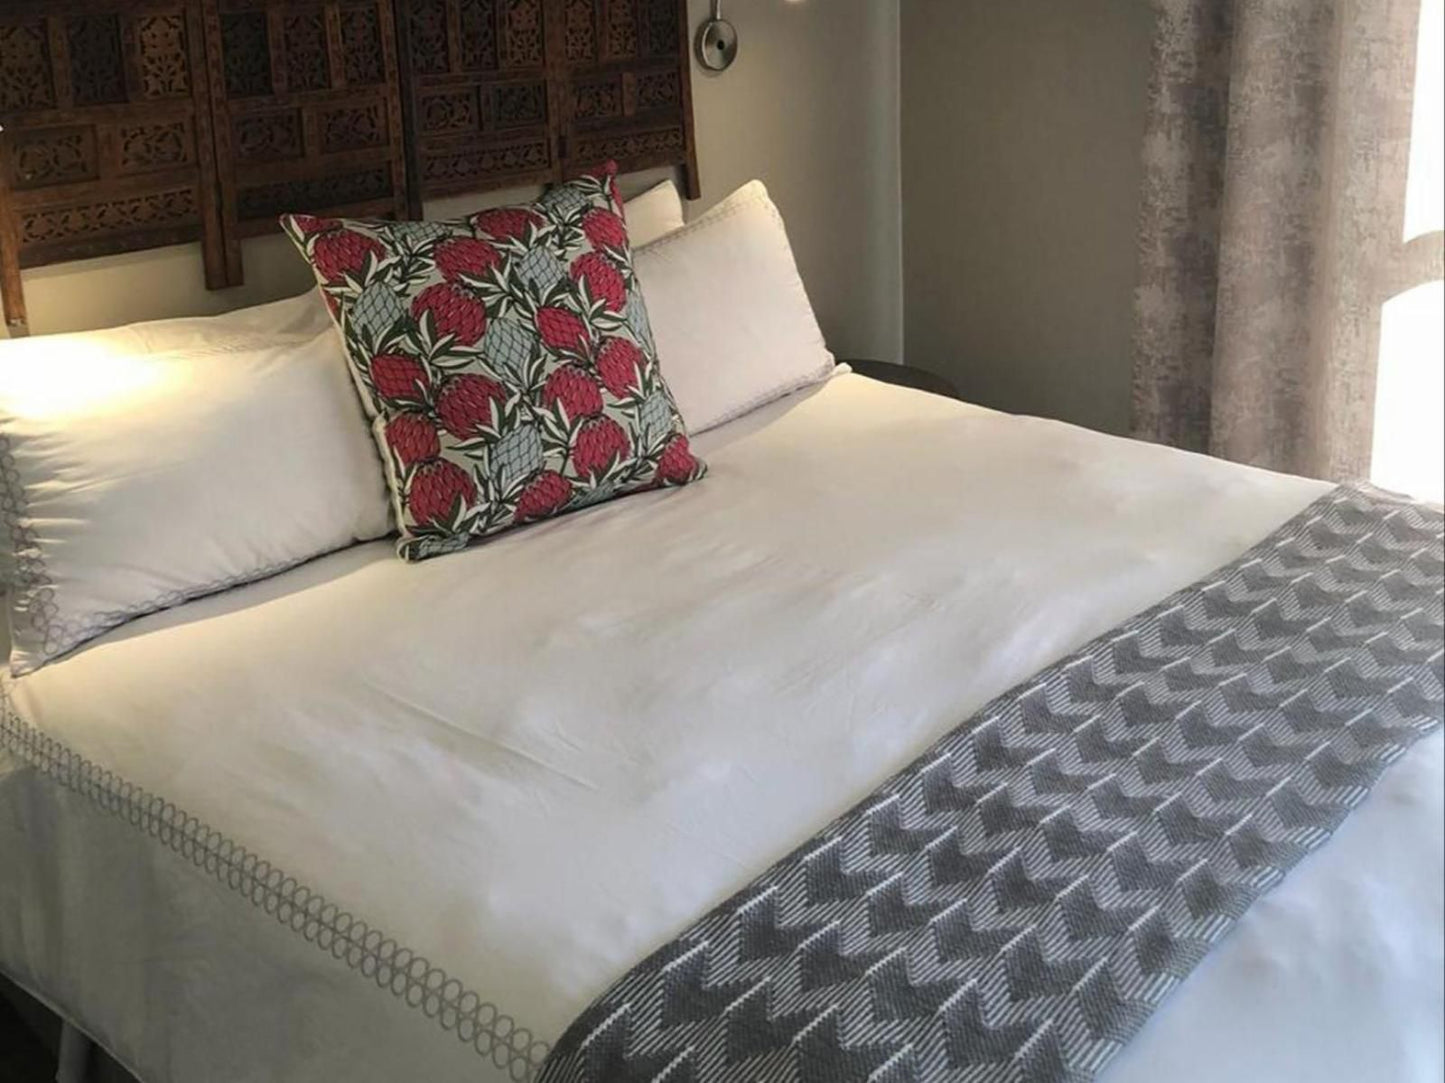 Cute And Quirky Clarens Clarens Golf And Trout Estate Clarens Free State South Africa Bedroom